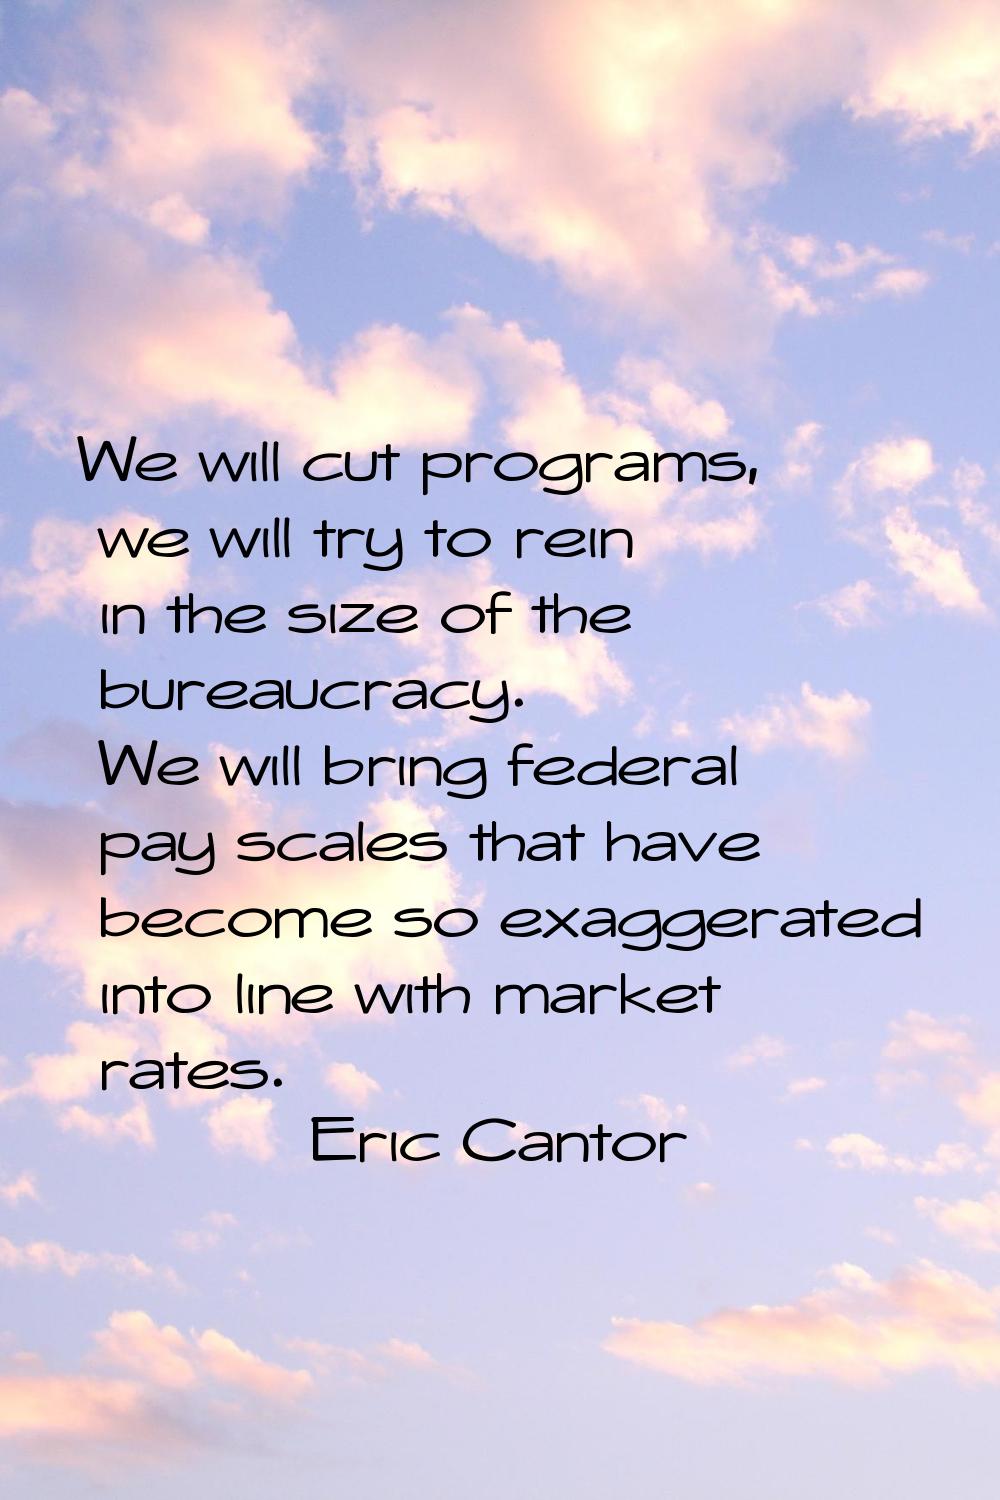 We will cut programs, we will try to rein in the size of the bureaucracy. We will bring federal pay